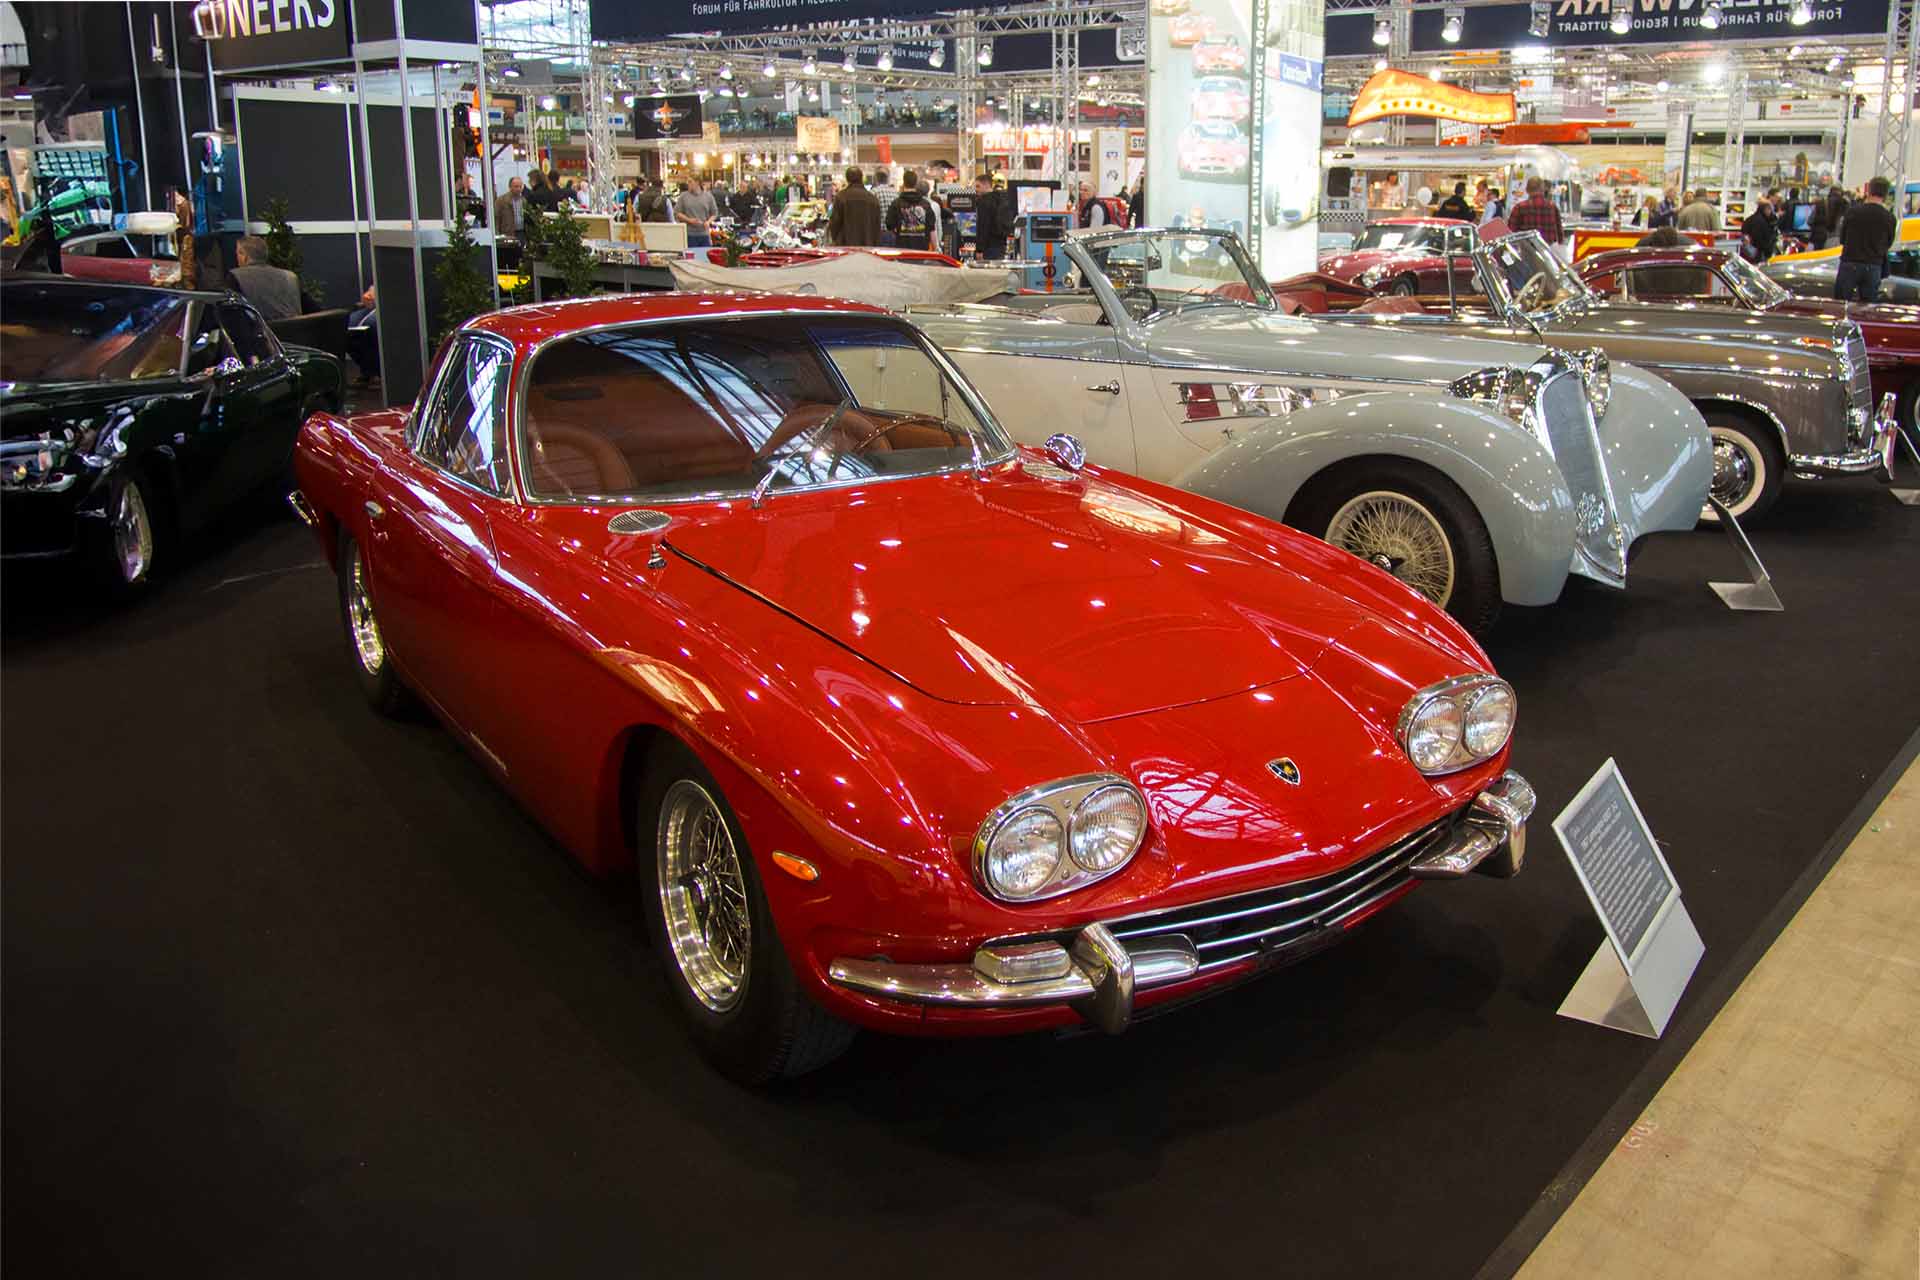 Red Lamborghini 400 GT displayed in an auto show with other classic cars.